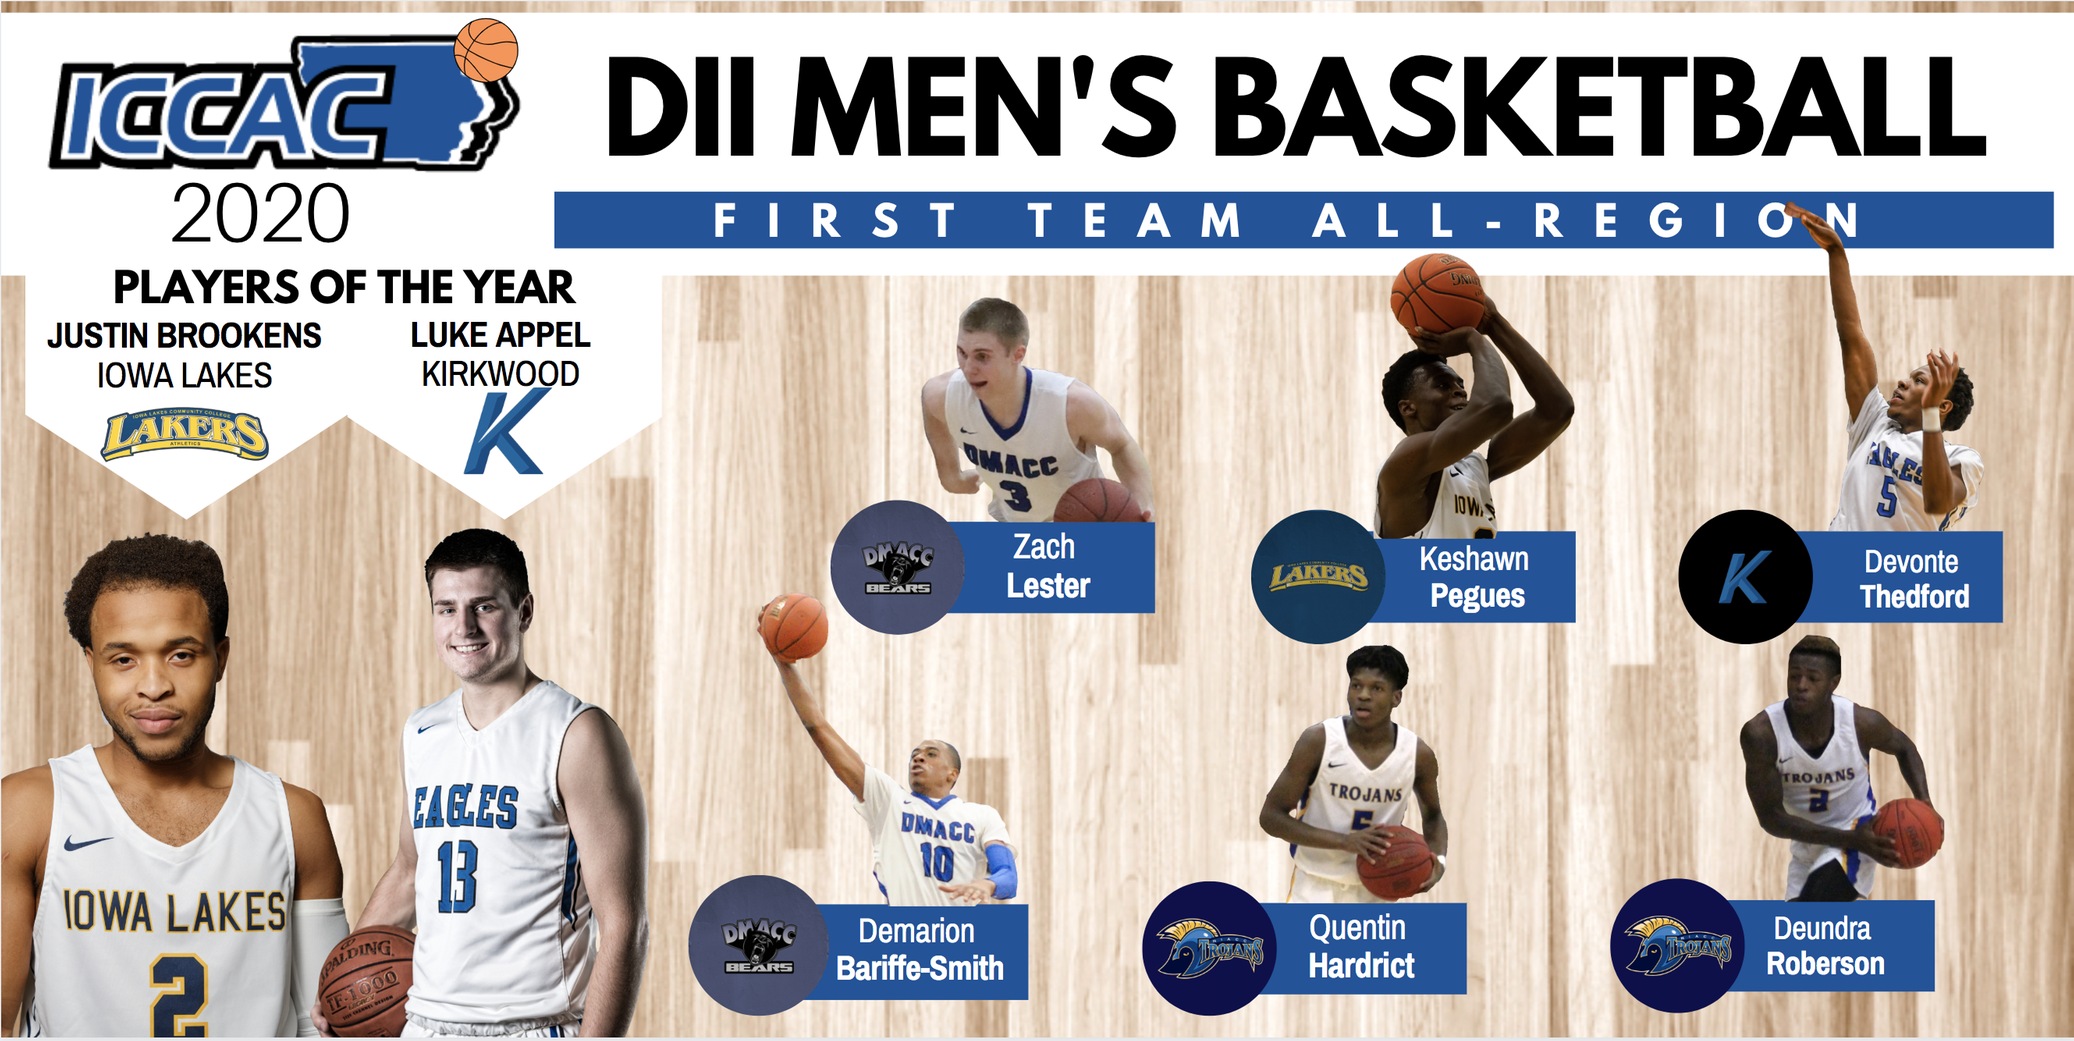 ICCAC Announces Best of Division II Men's Basketball